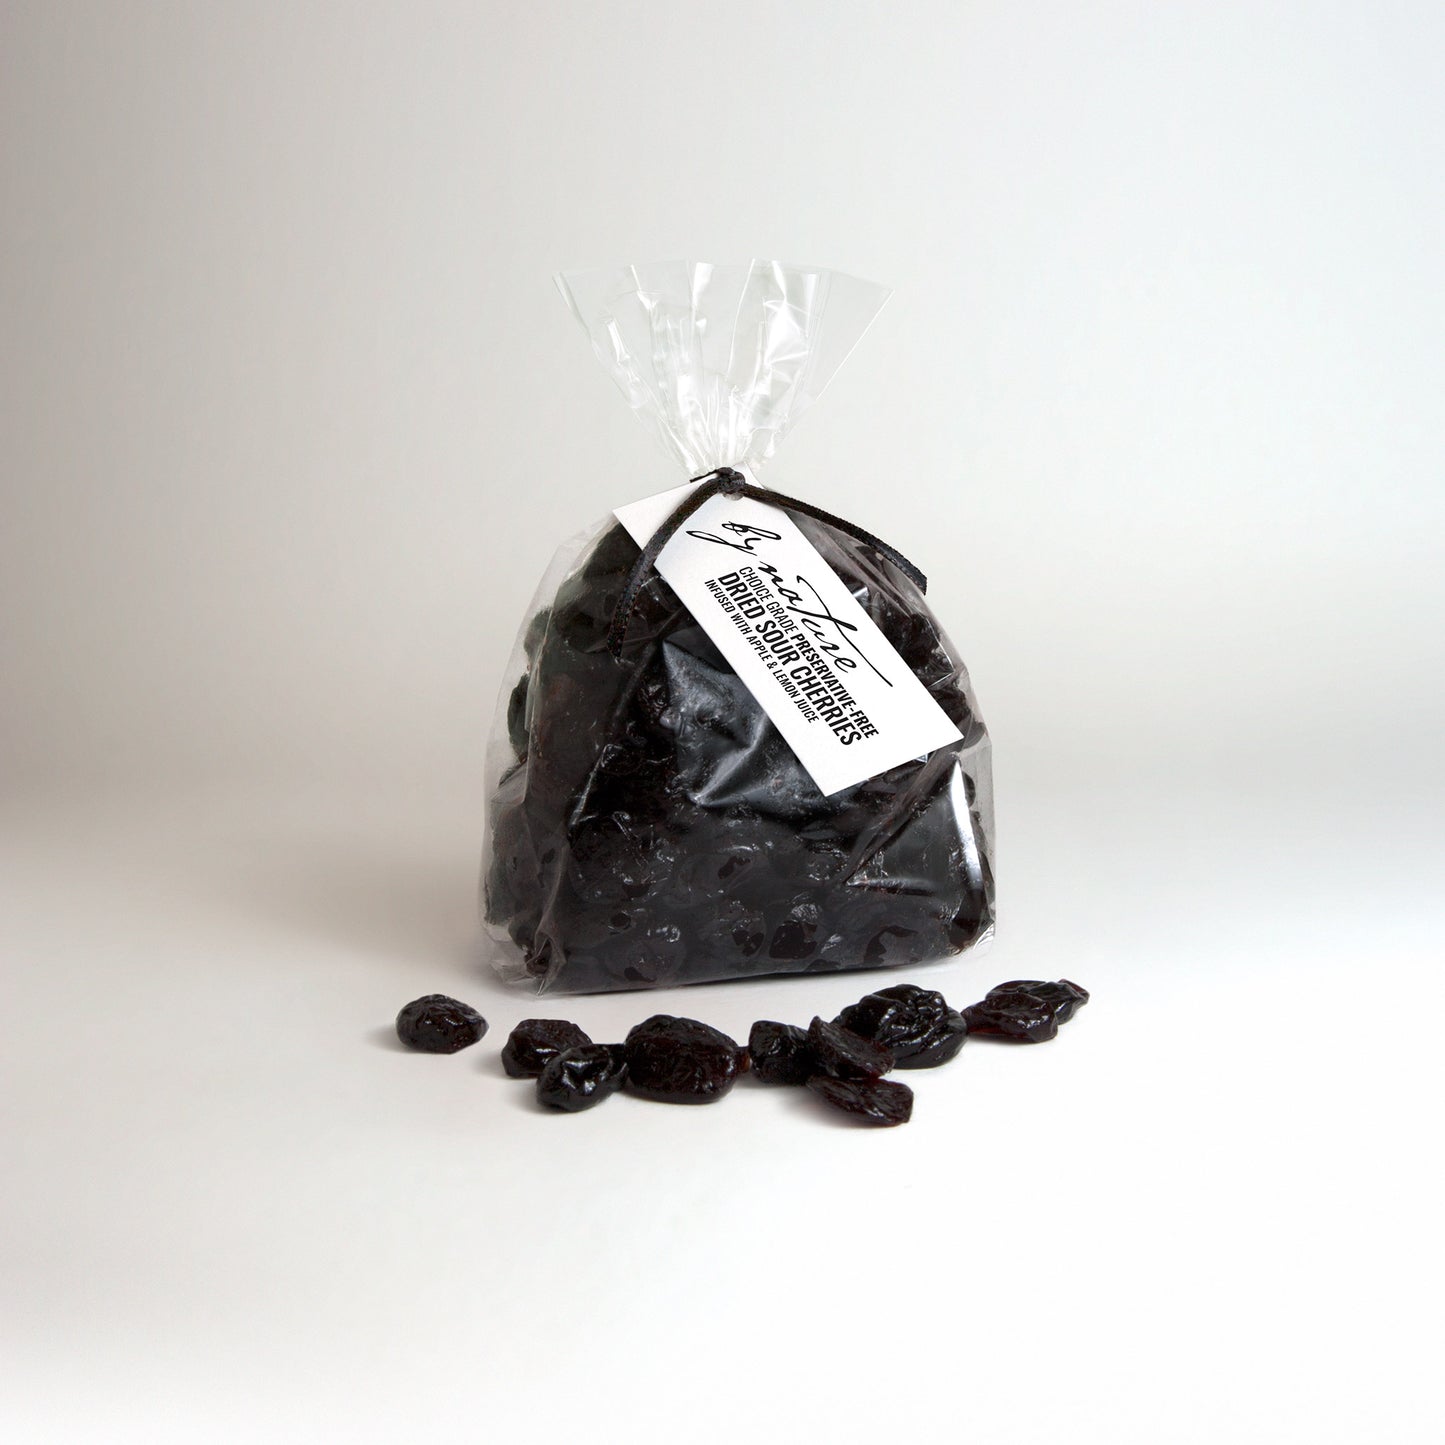 BY NATURE Dried Sour Cherries, 200g - apple juice infused, preservative-free.